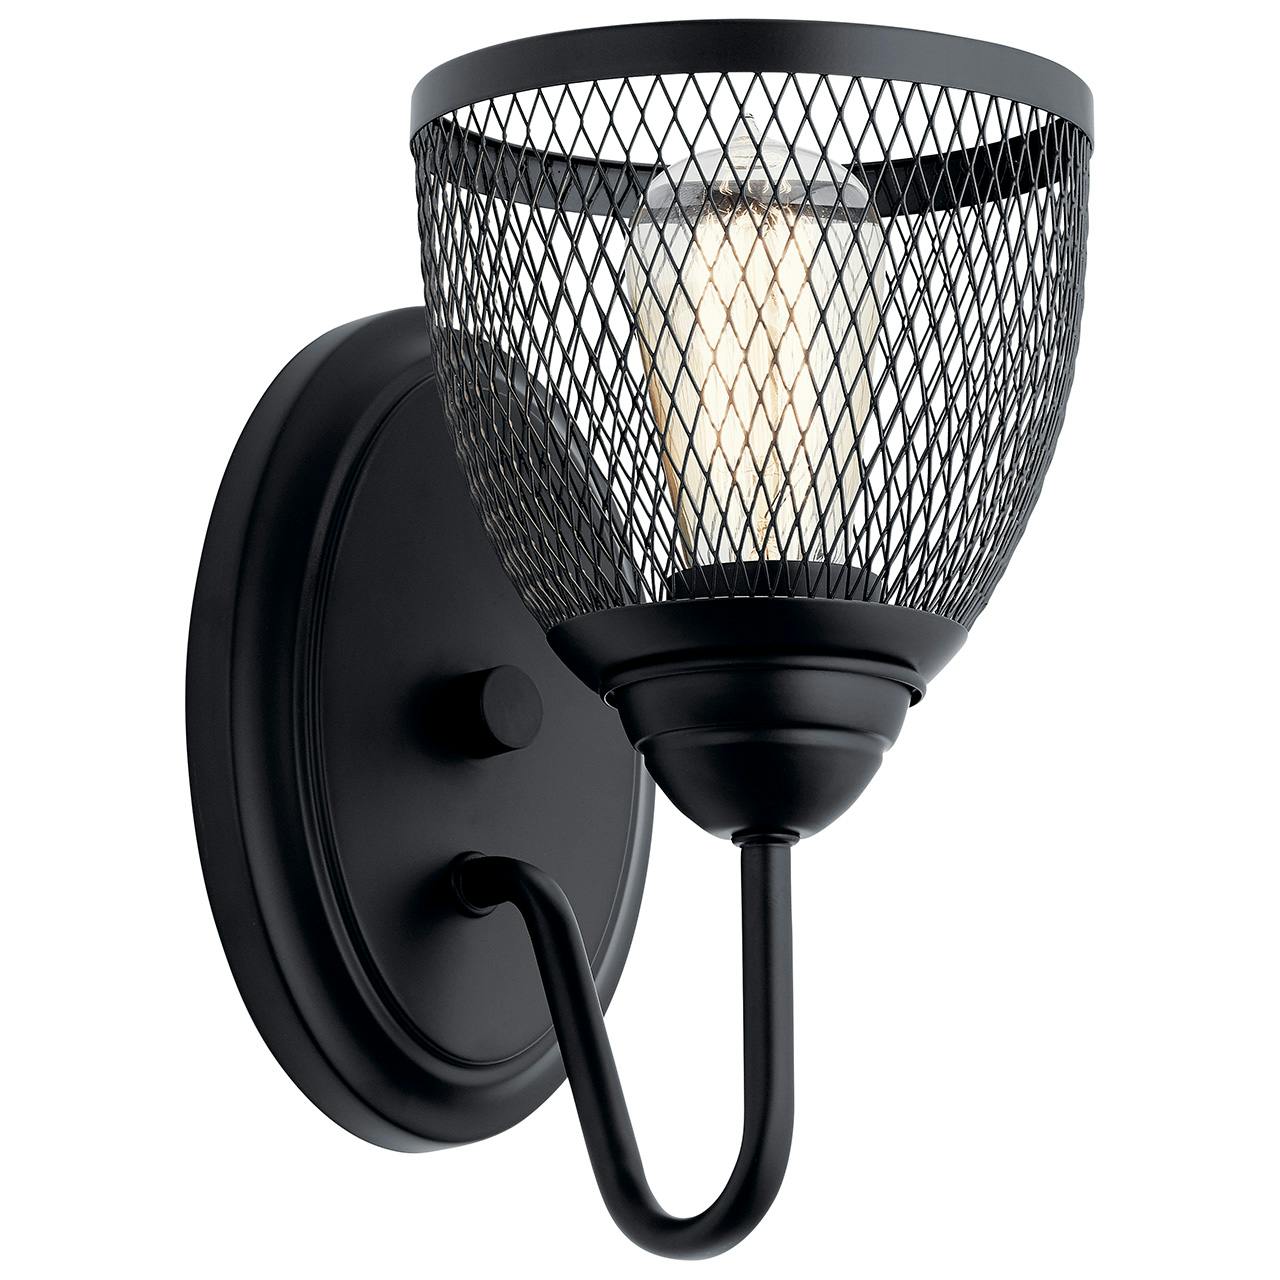 Voclain™ 1 Light Wall Sconce in Black on a white background